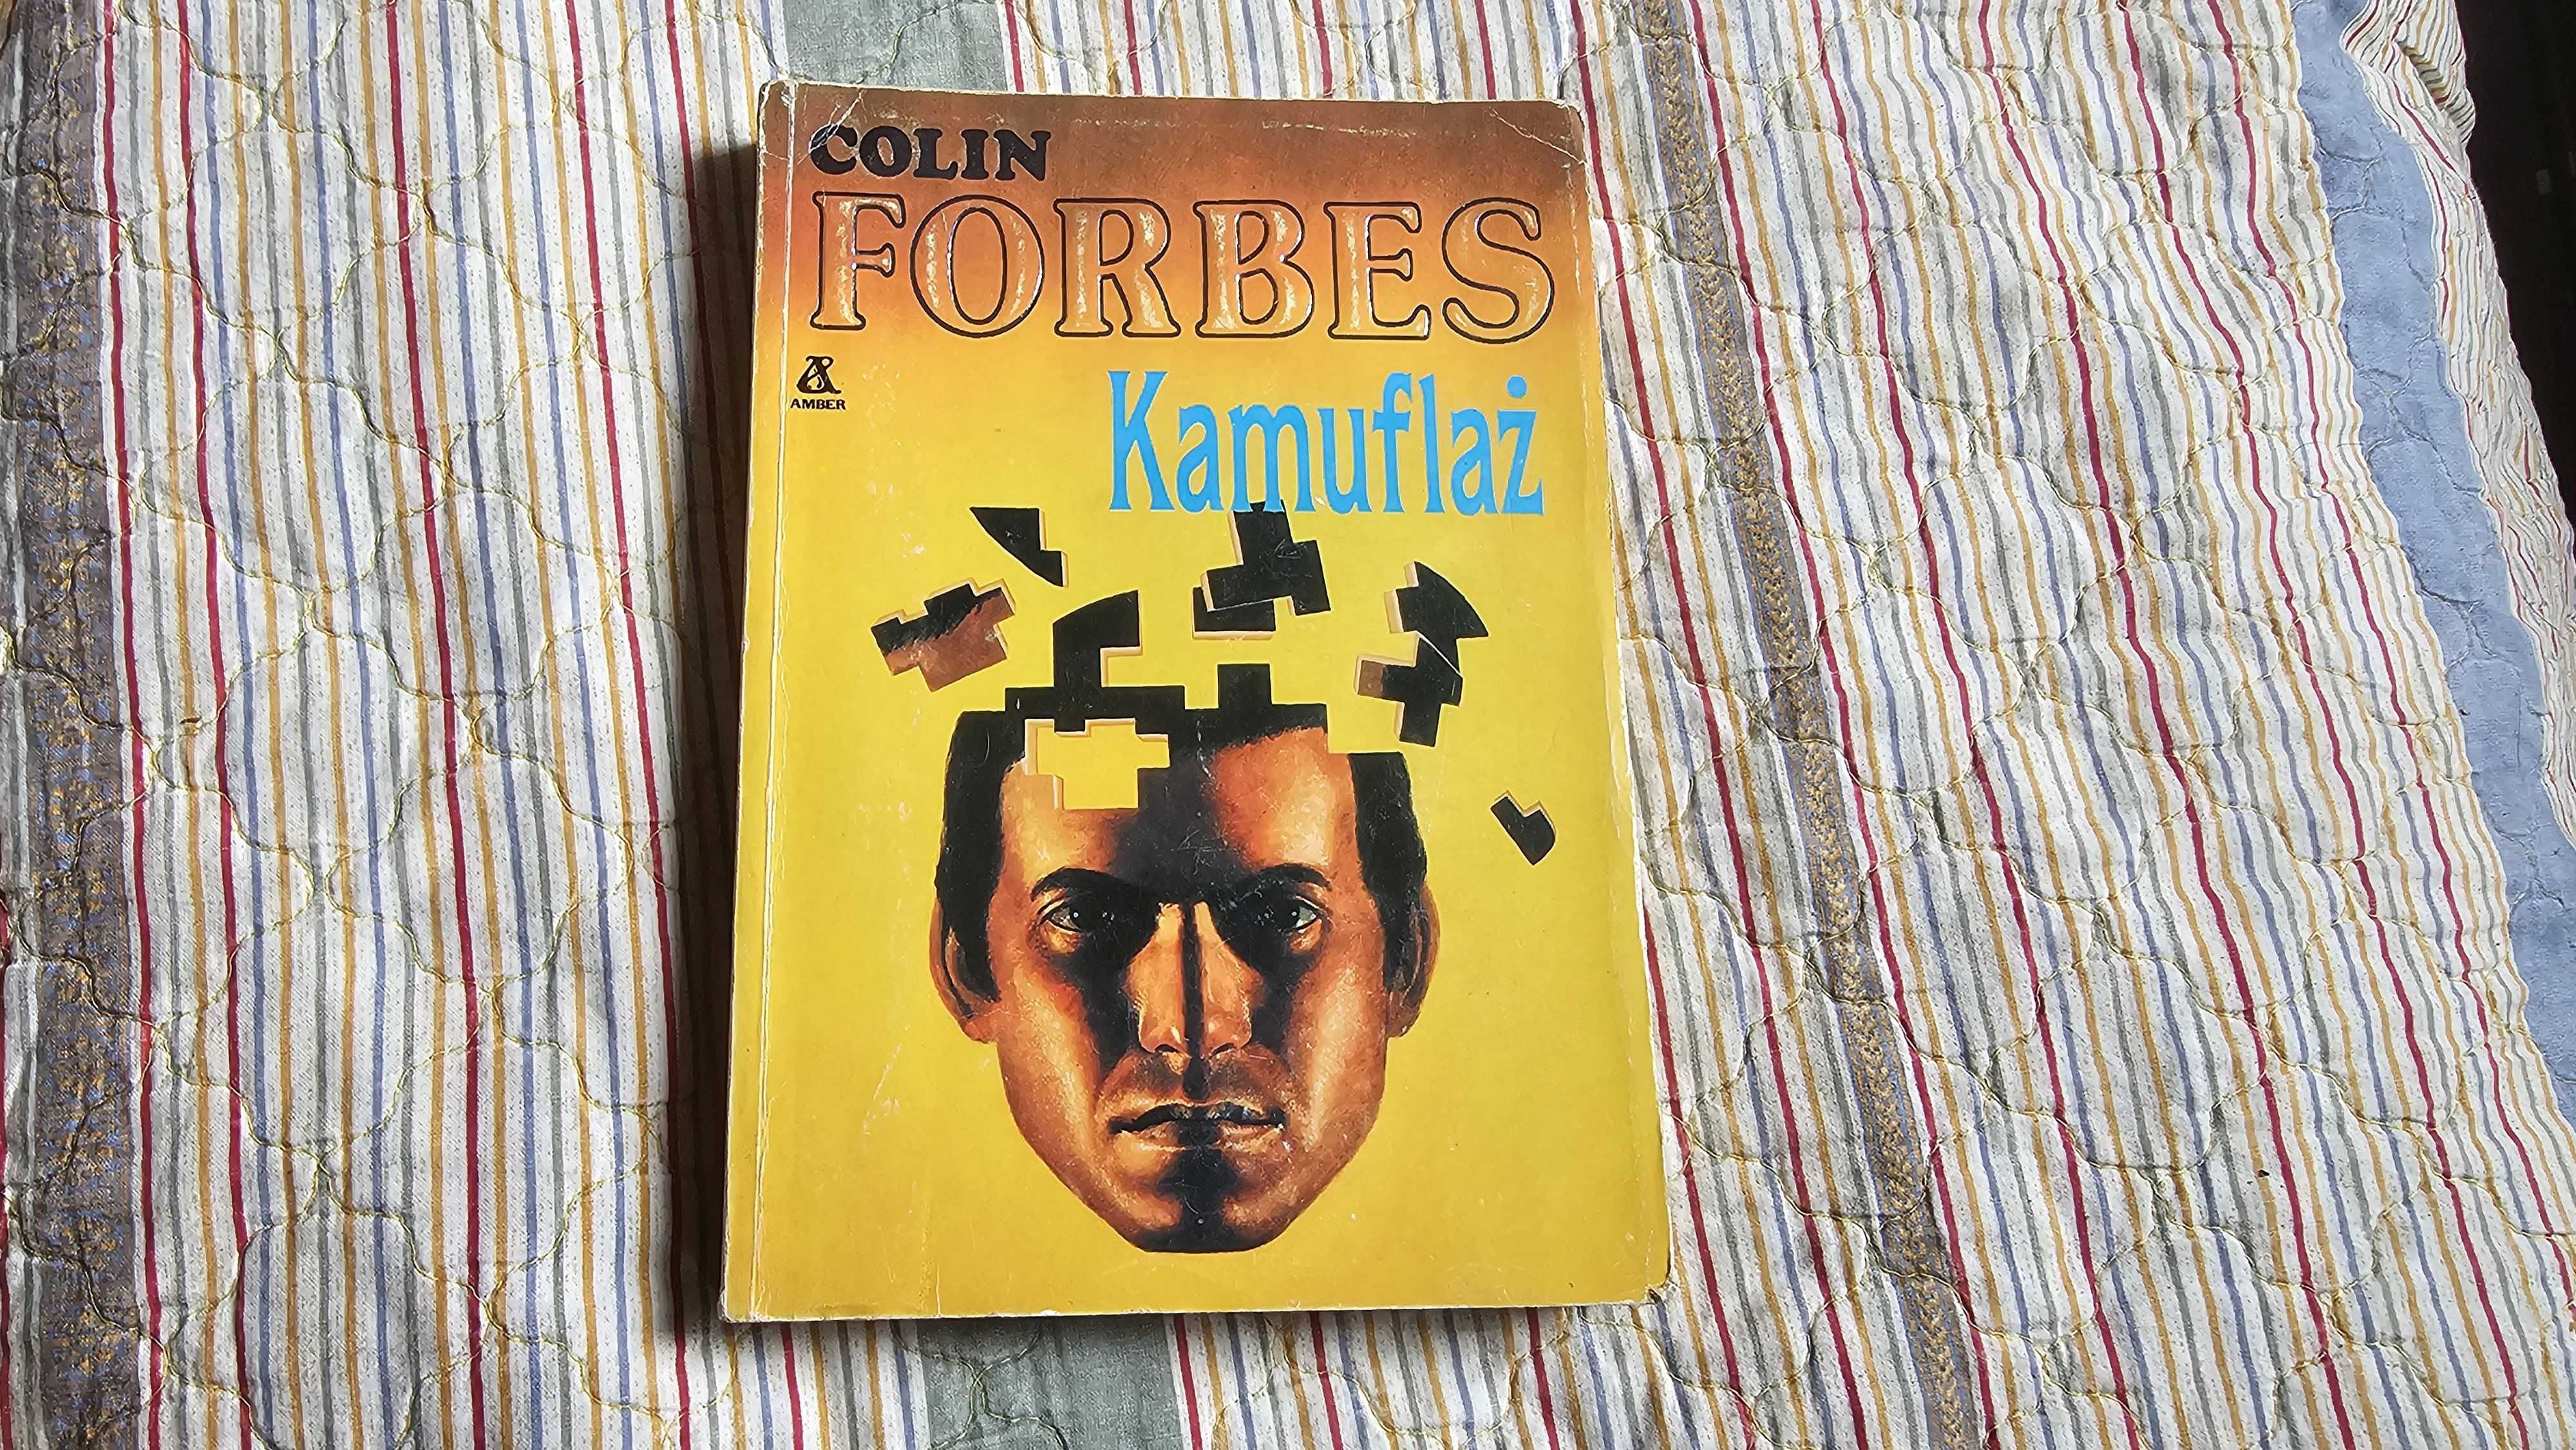 A2 Colin Forbes - Kamuflaż - Amber 1991